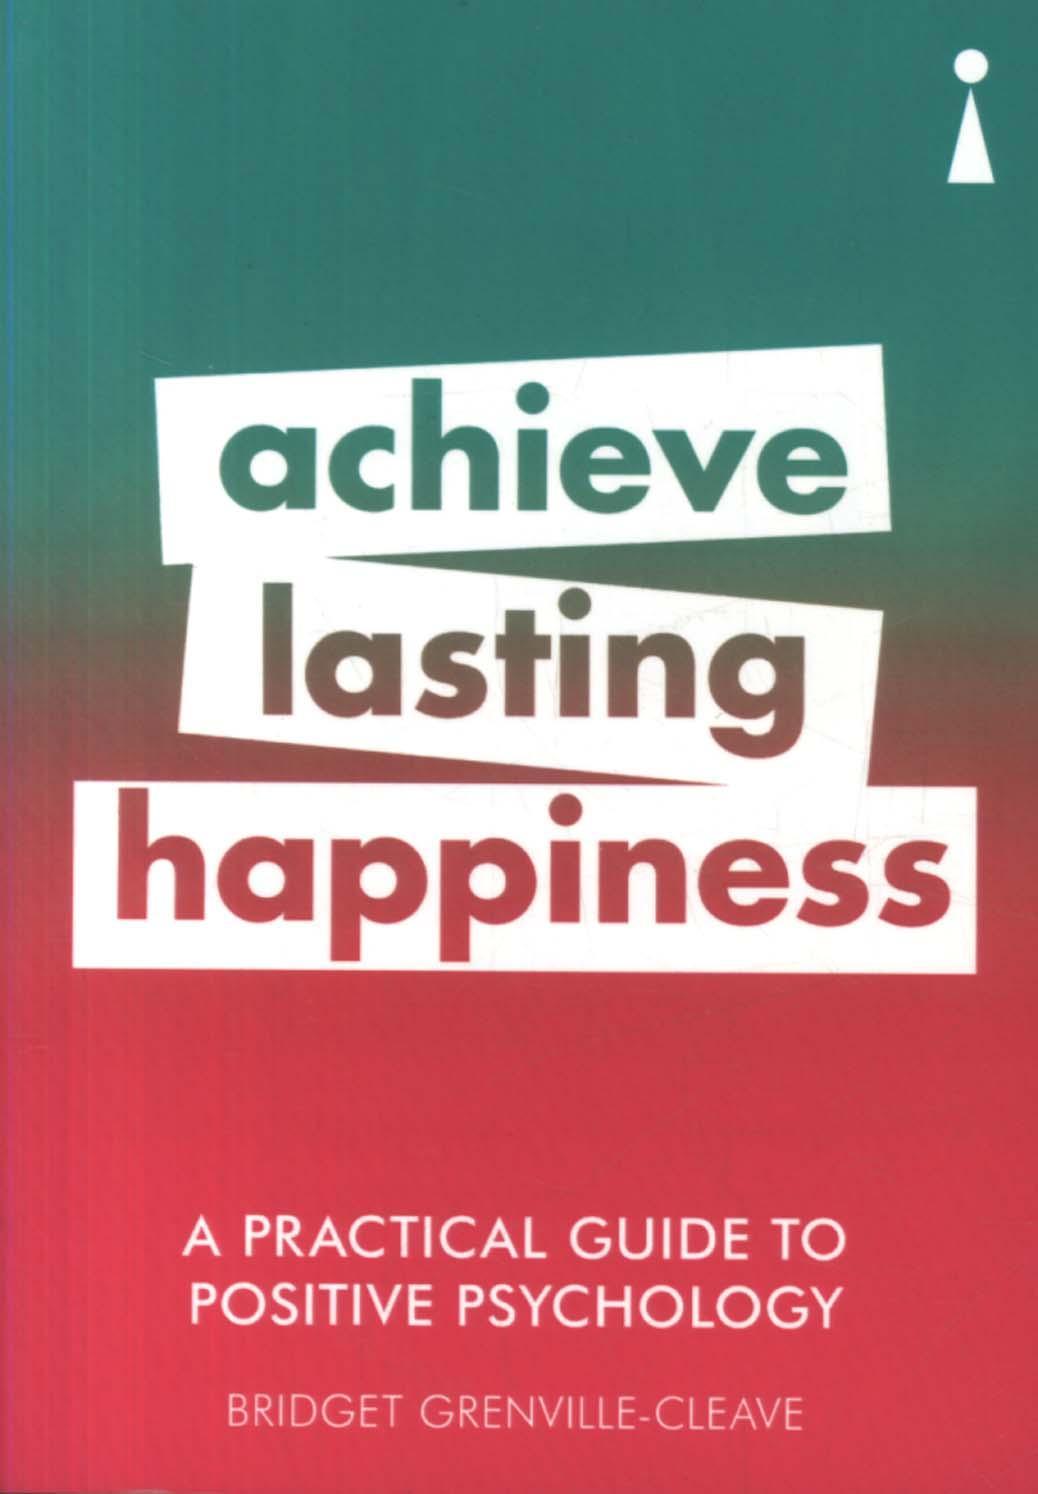 Practical Guide to Positive Psychology - Bridget Grenville-Cleave